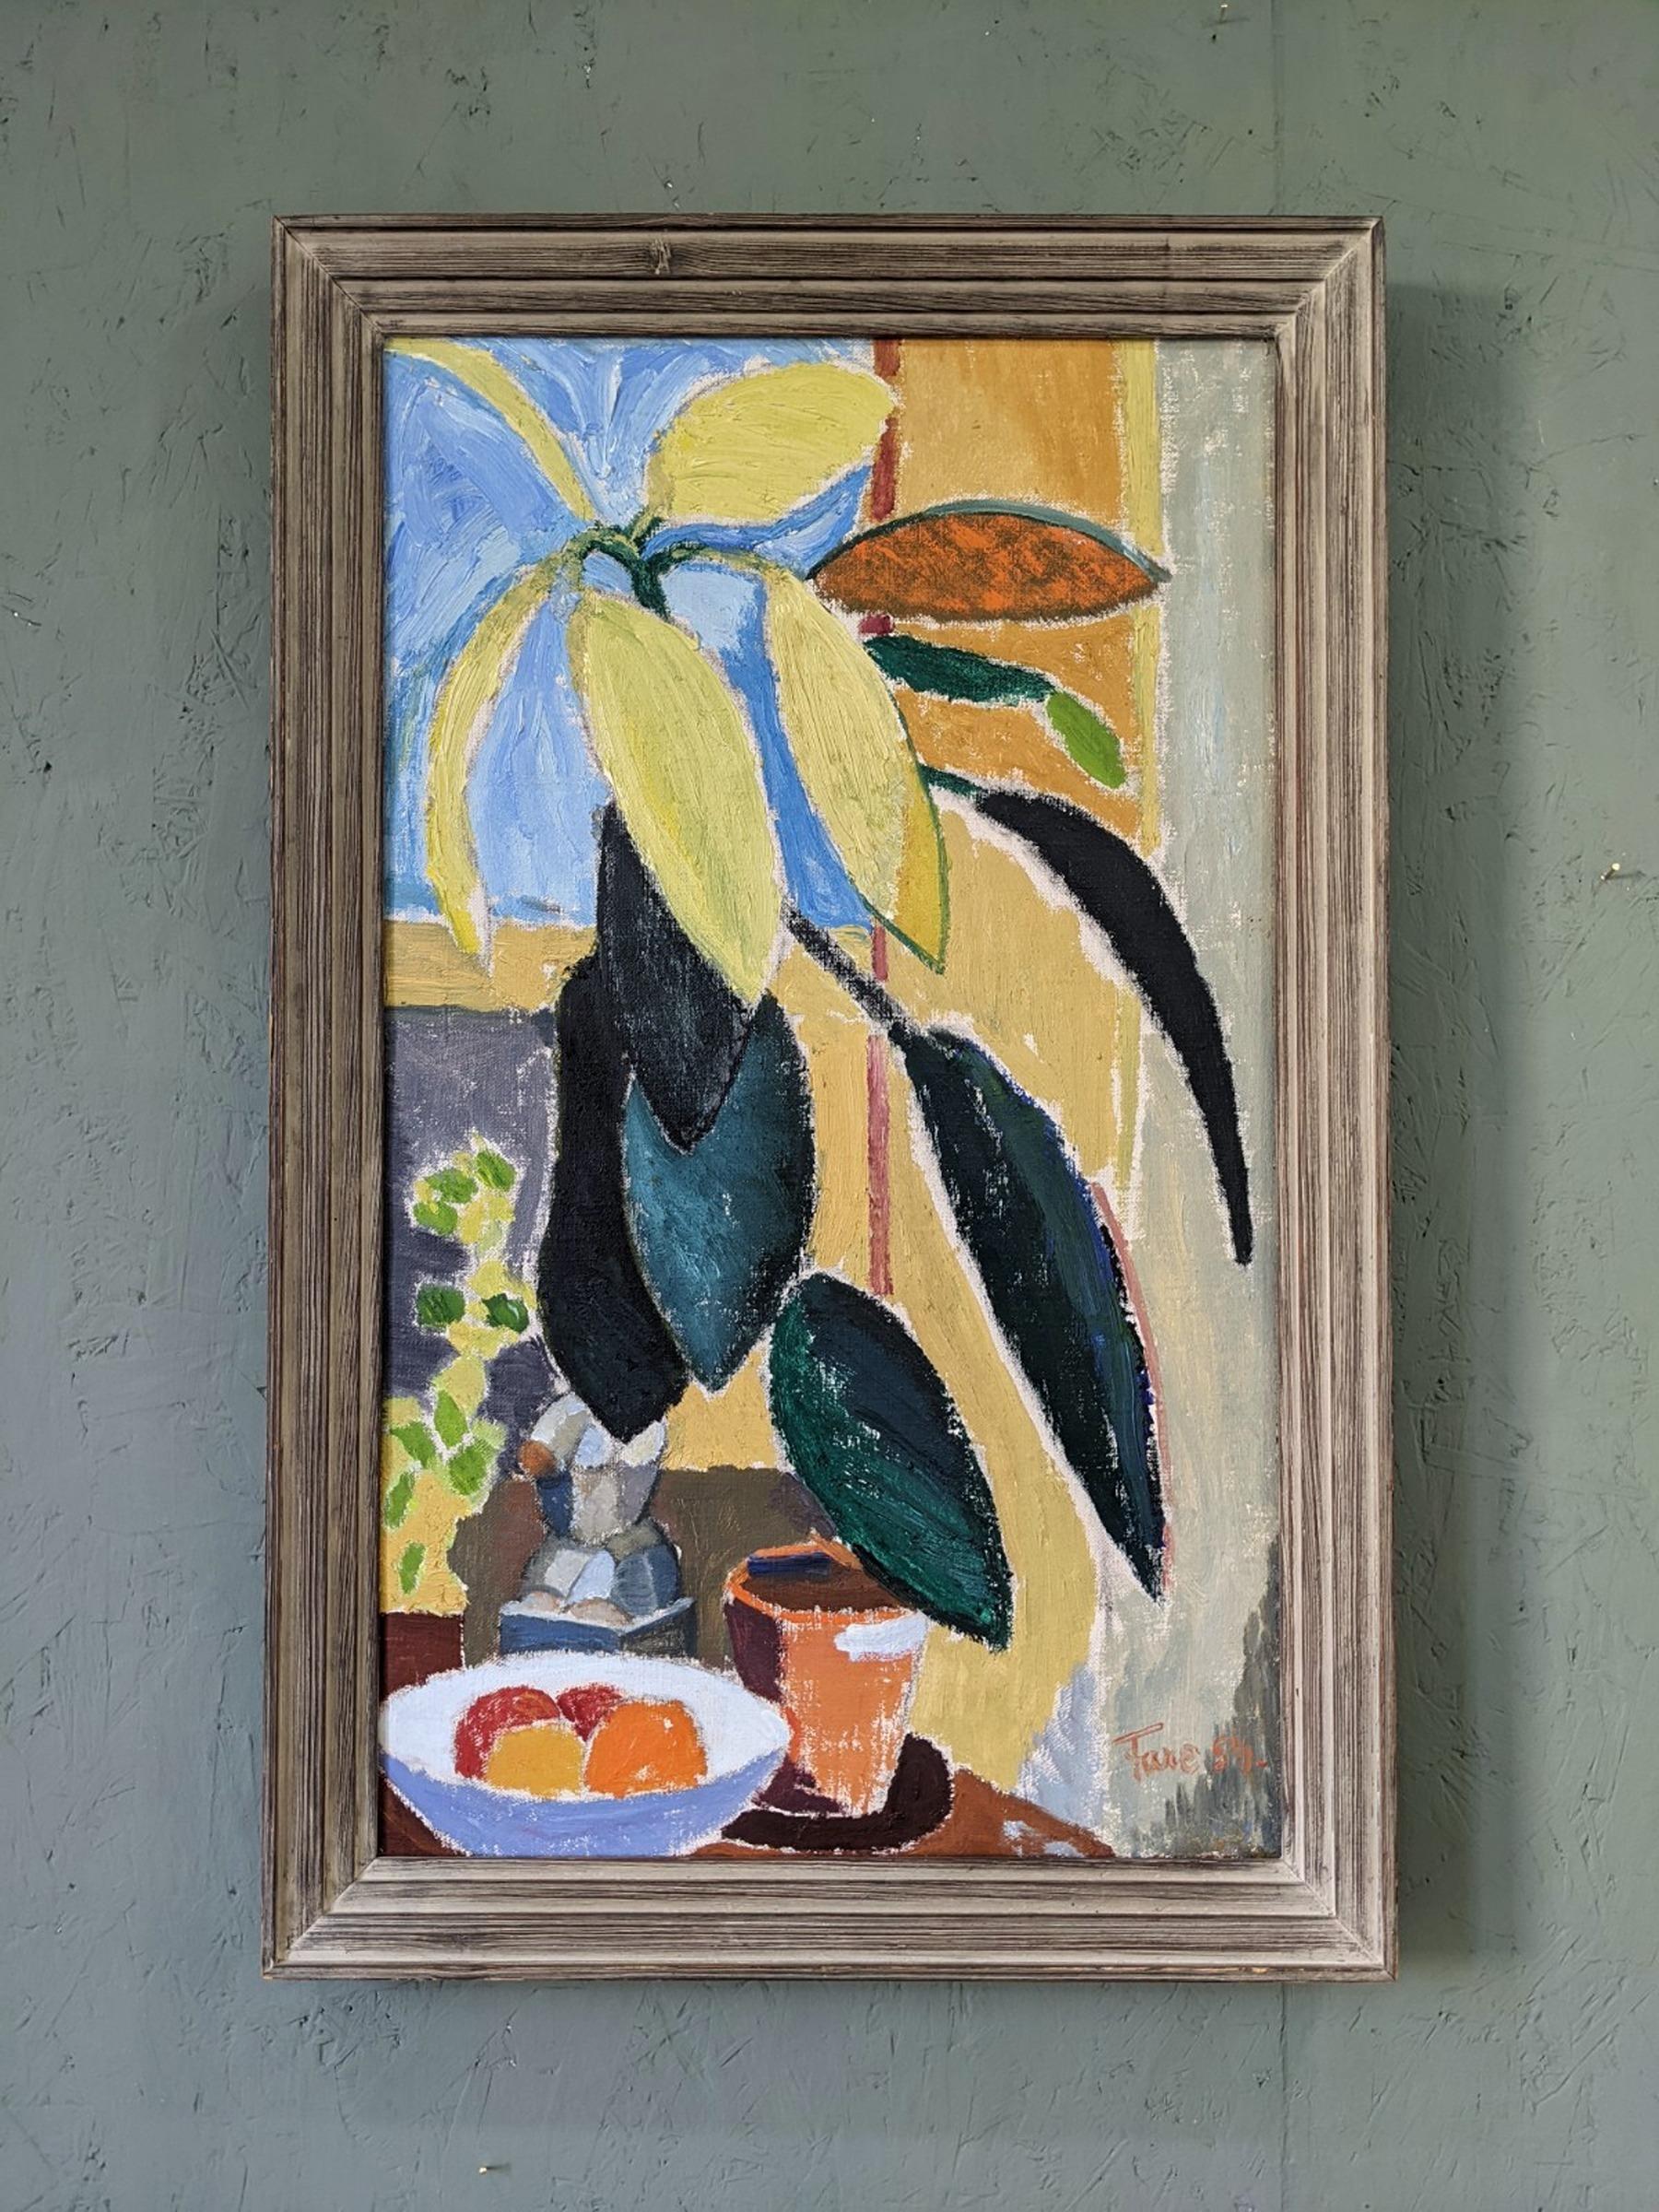 FICUS 
Size: 71 x 45 cm (including frame)
Oil on Canvas

A large and very well-executed mid-century modernist still life in oil, painted onto canvas and dated 1954.

Painted in an expressionist style with rich and vivid colouring and broad